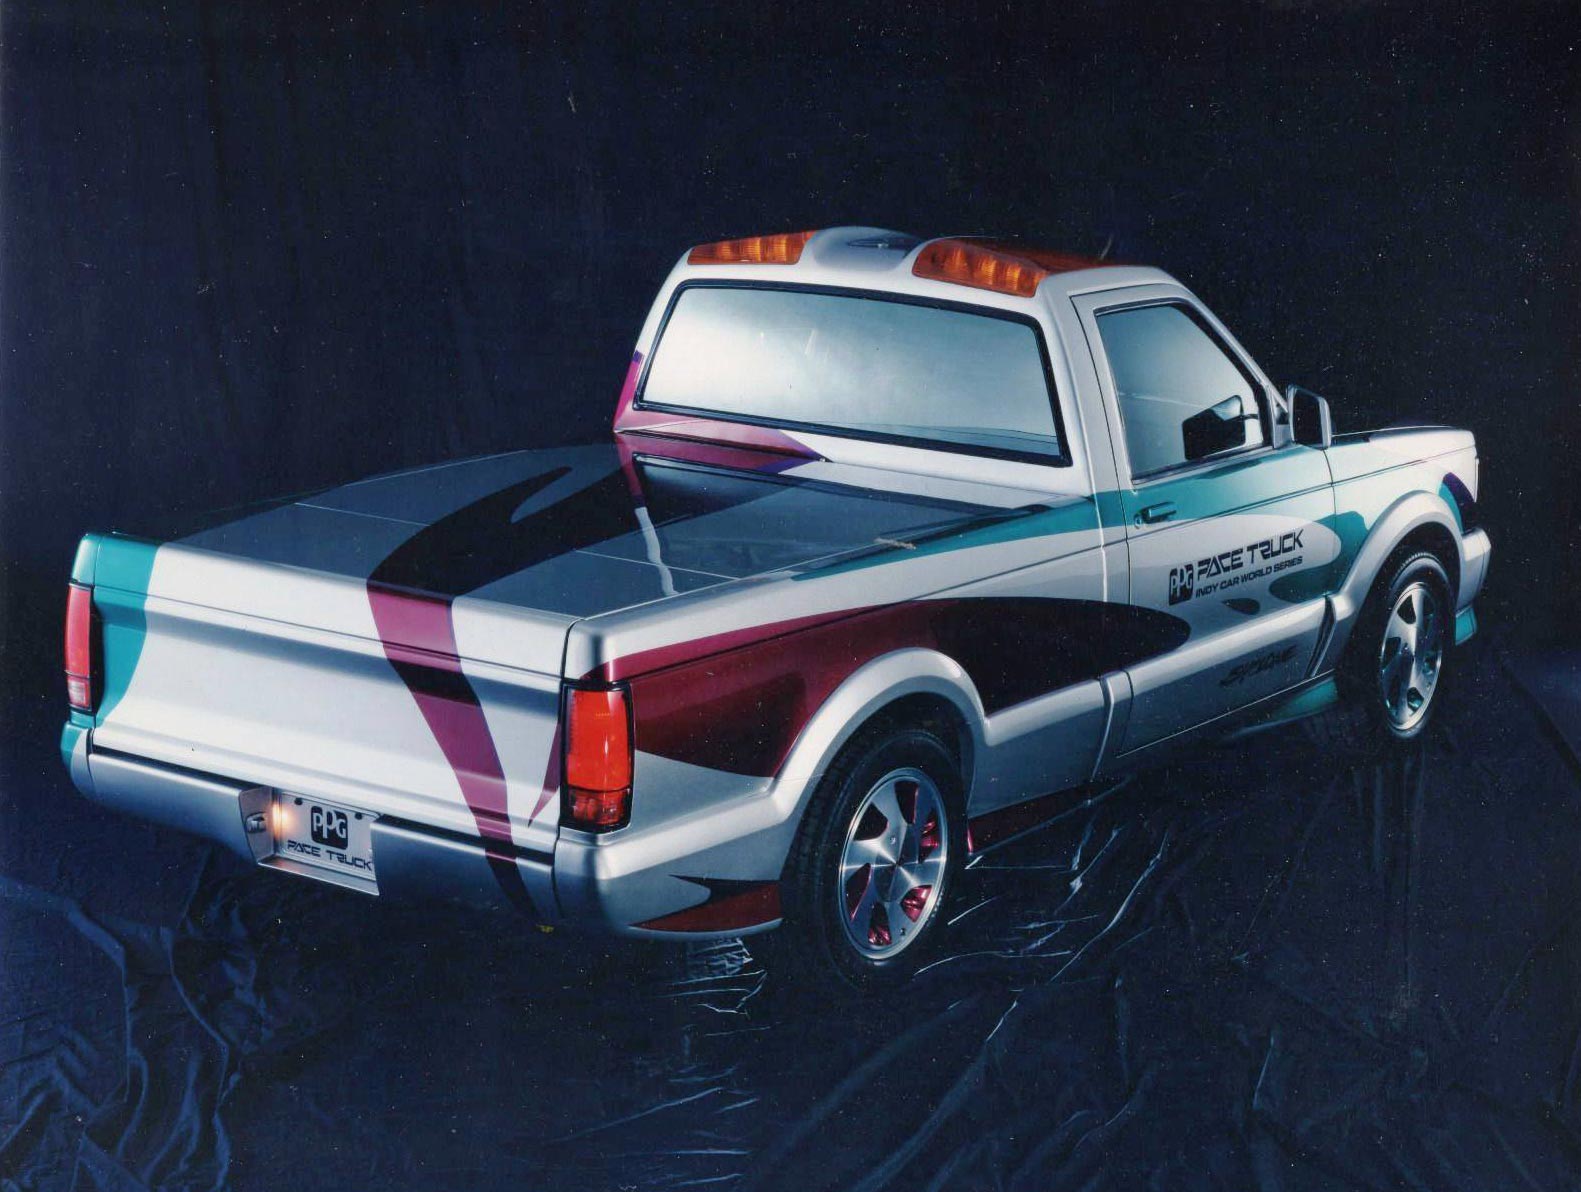 GMC Cyclone 1991 PPG Pace Truck